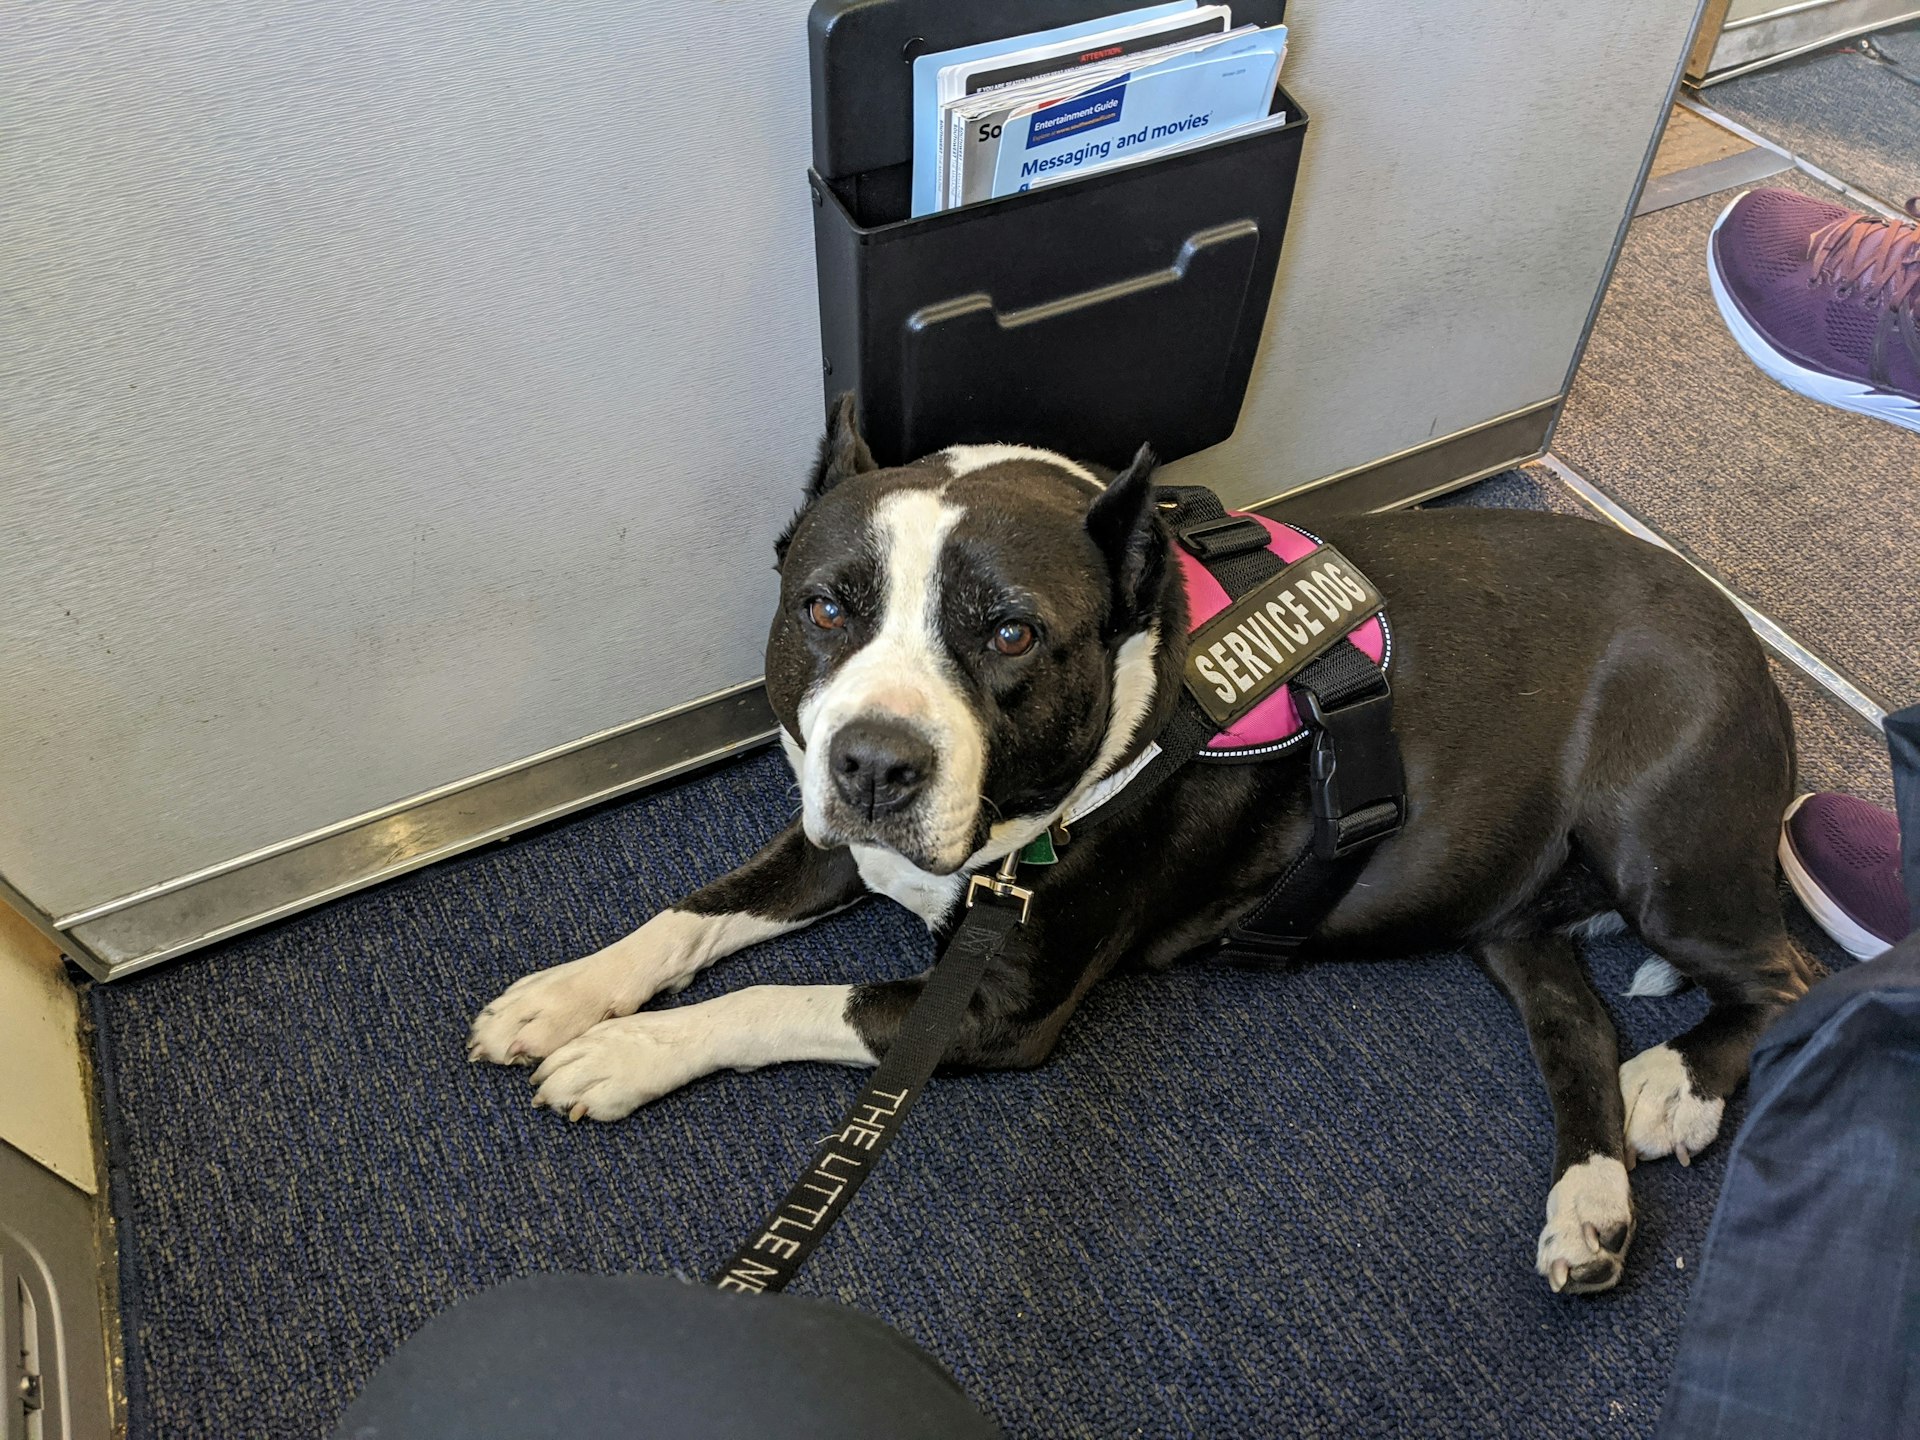 A dog on the floor of an airplane cabin